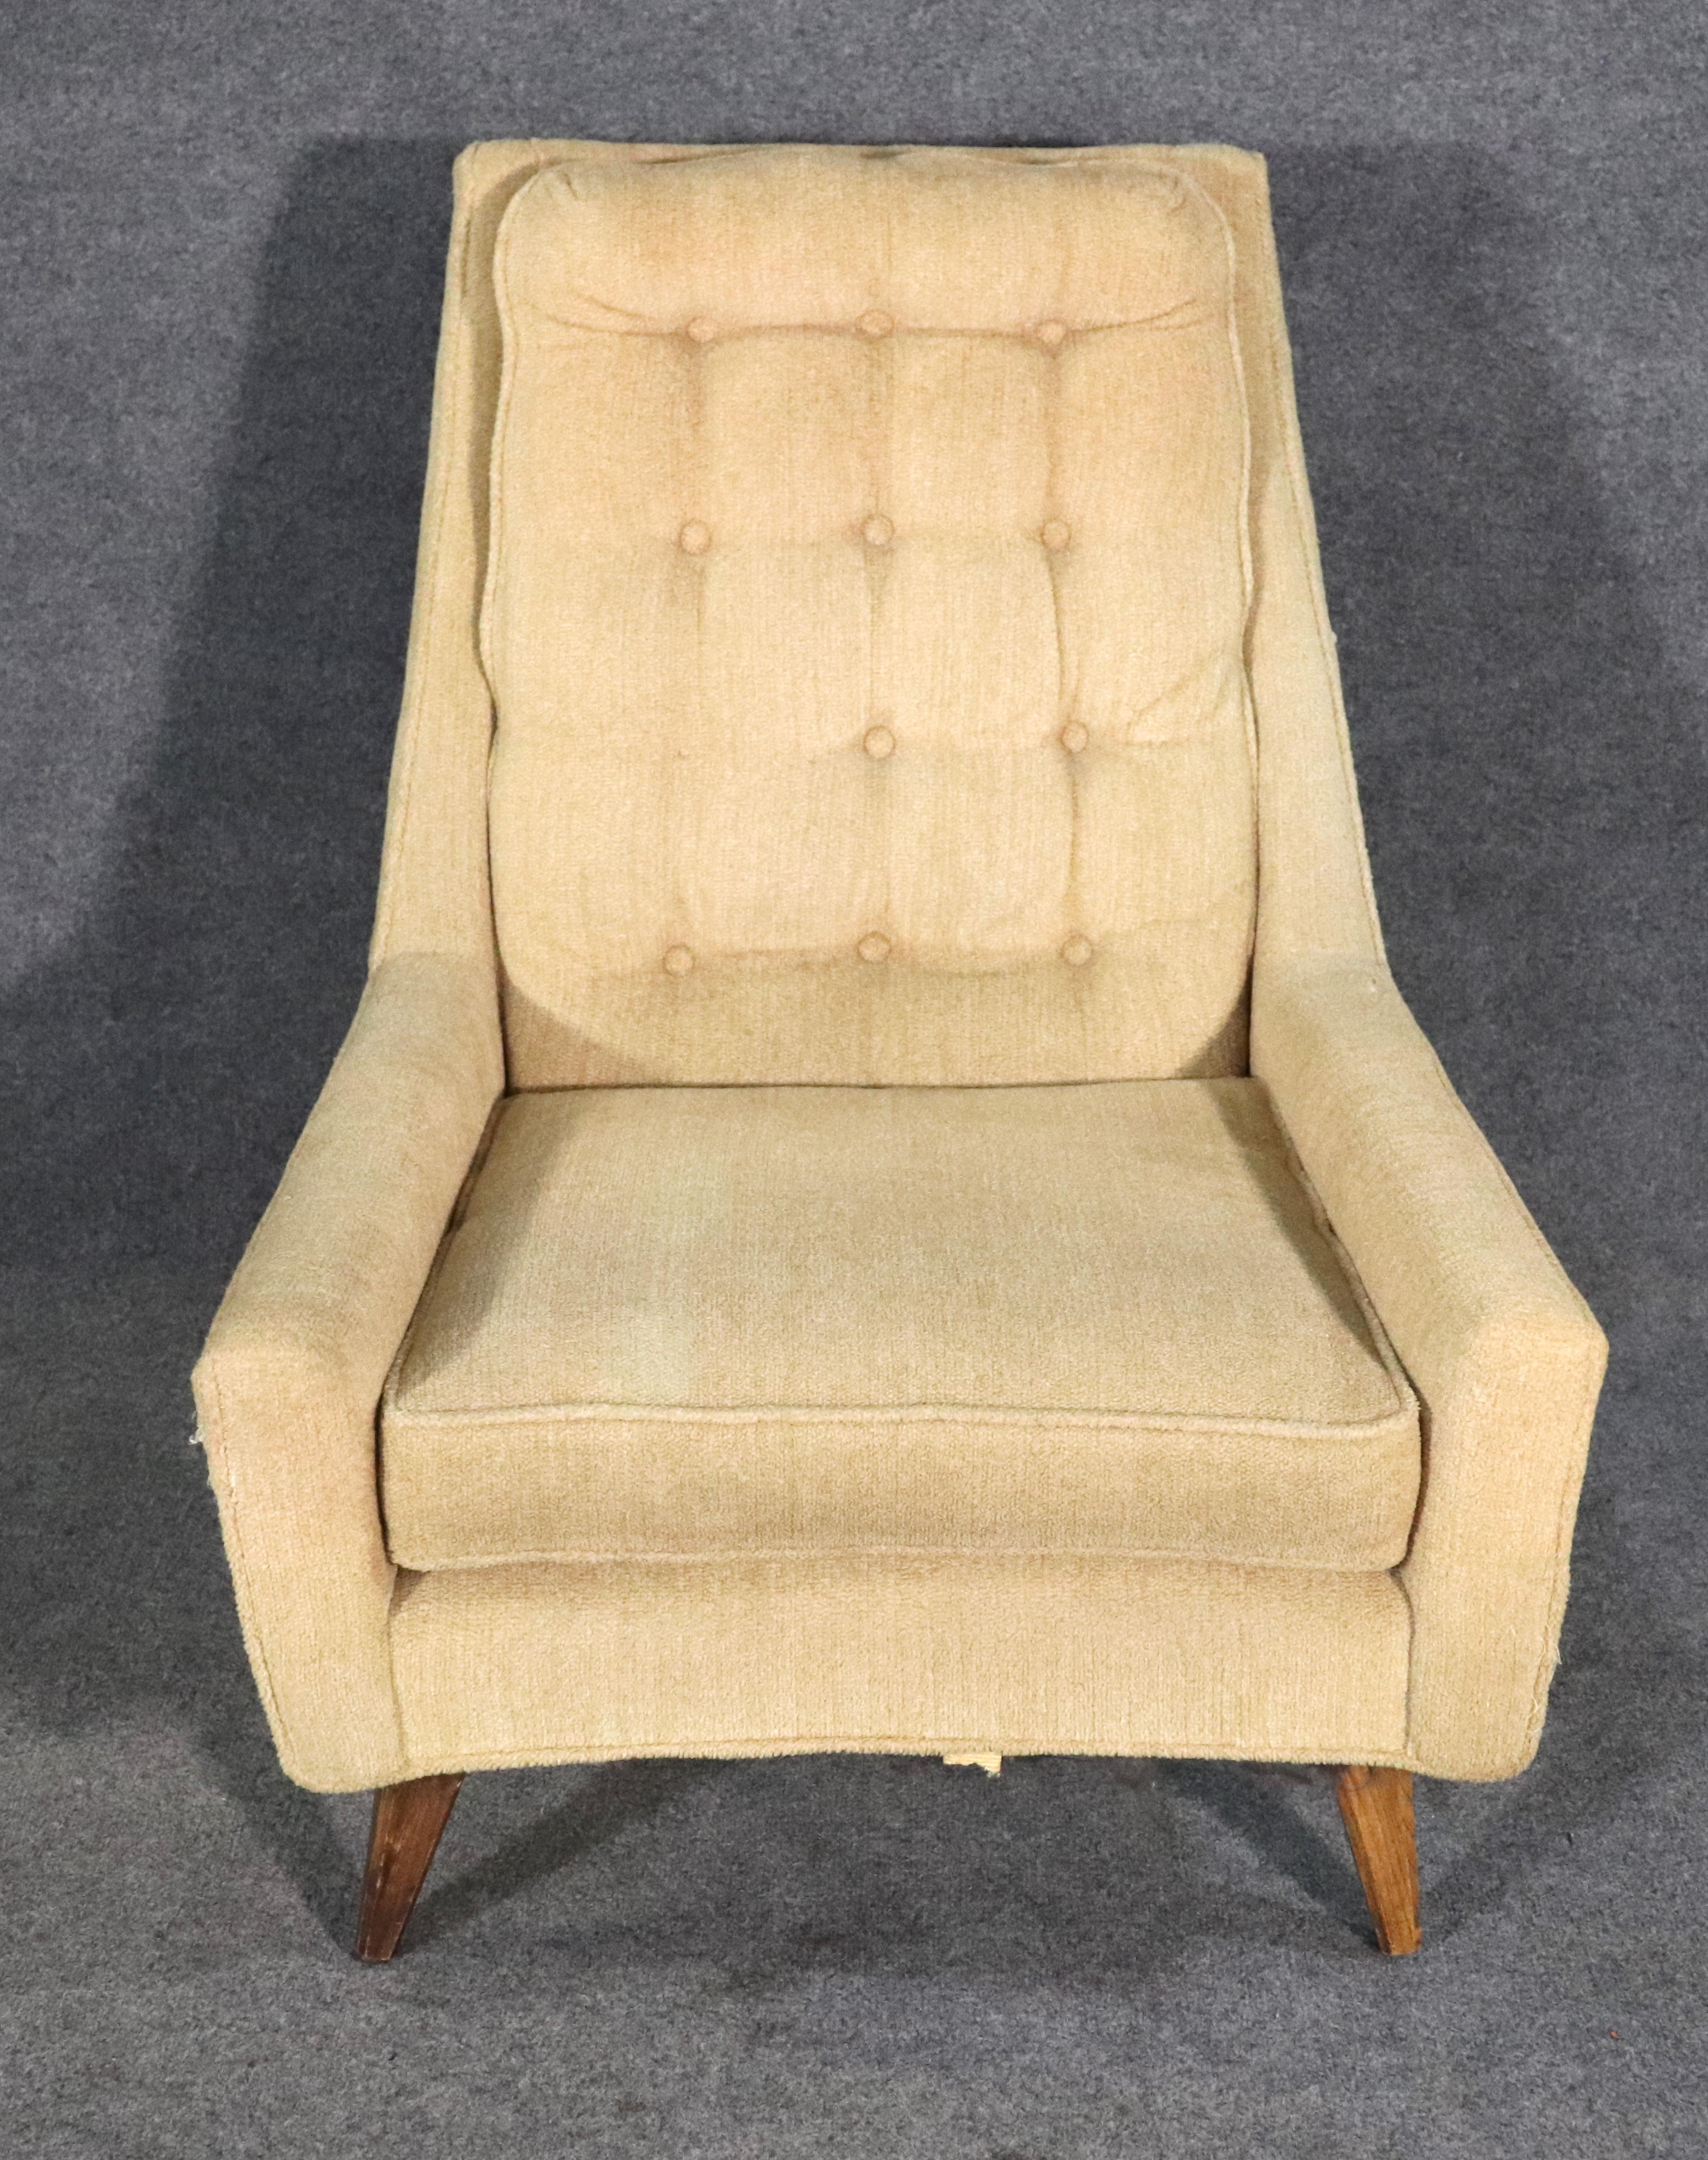 Large mid-century modern lounge chair with tufted back. Vintage armchair fully upholstered on tapered wood legs.
Please confirm location NY or NJ